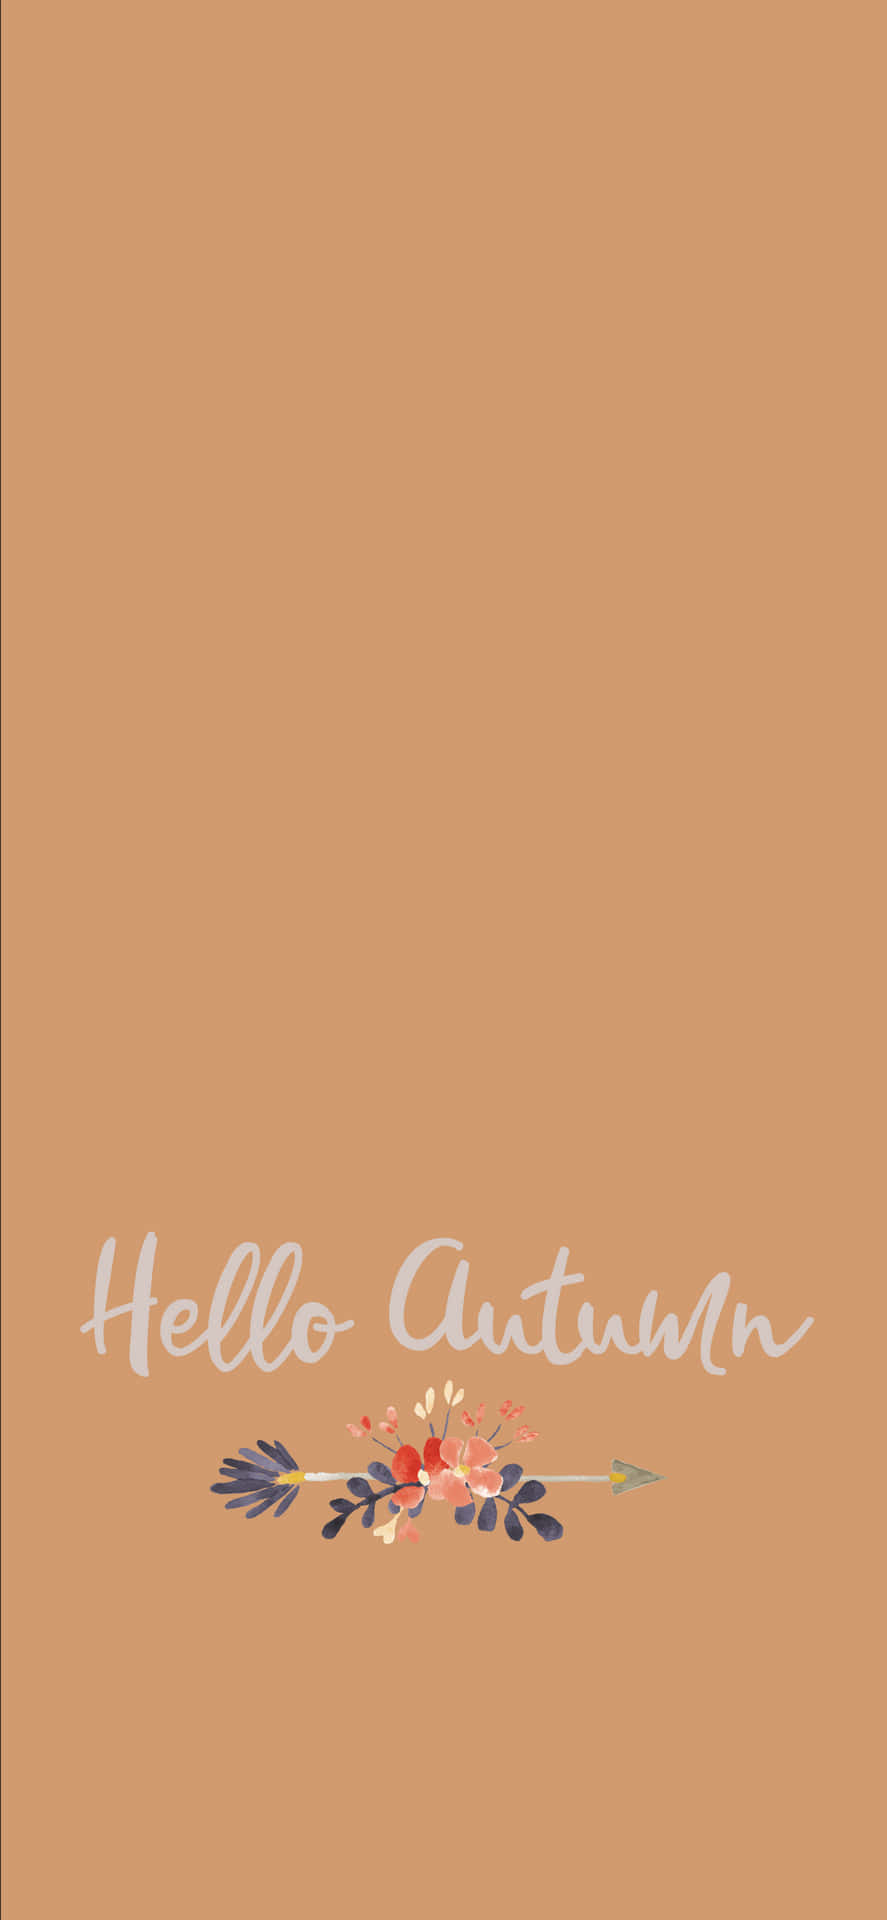 Get Ready for Fall with this Cute Autumn Iphone! Wallpaper